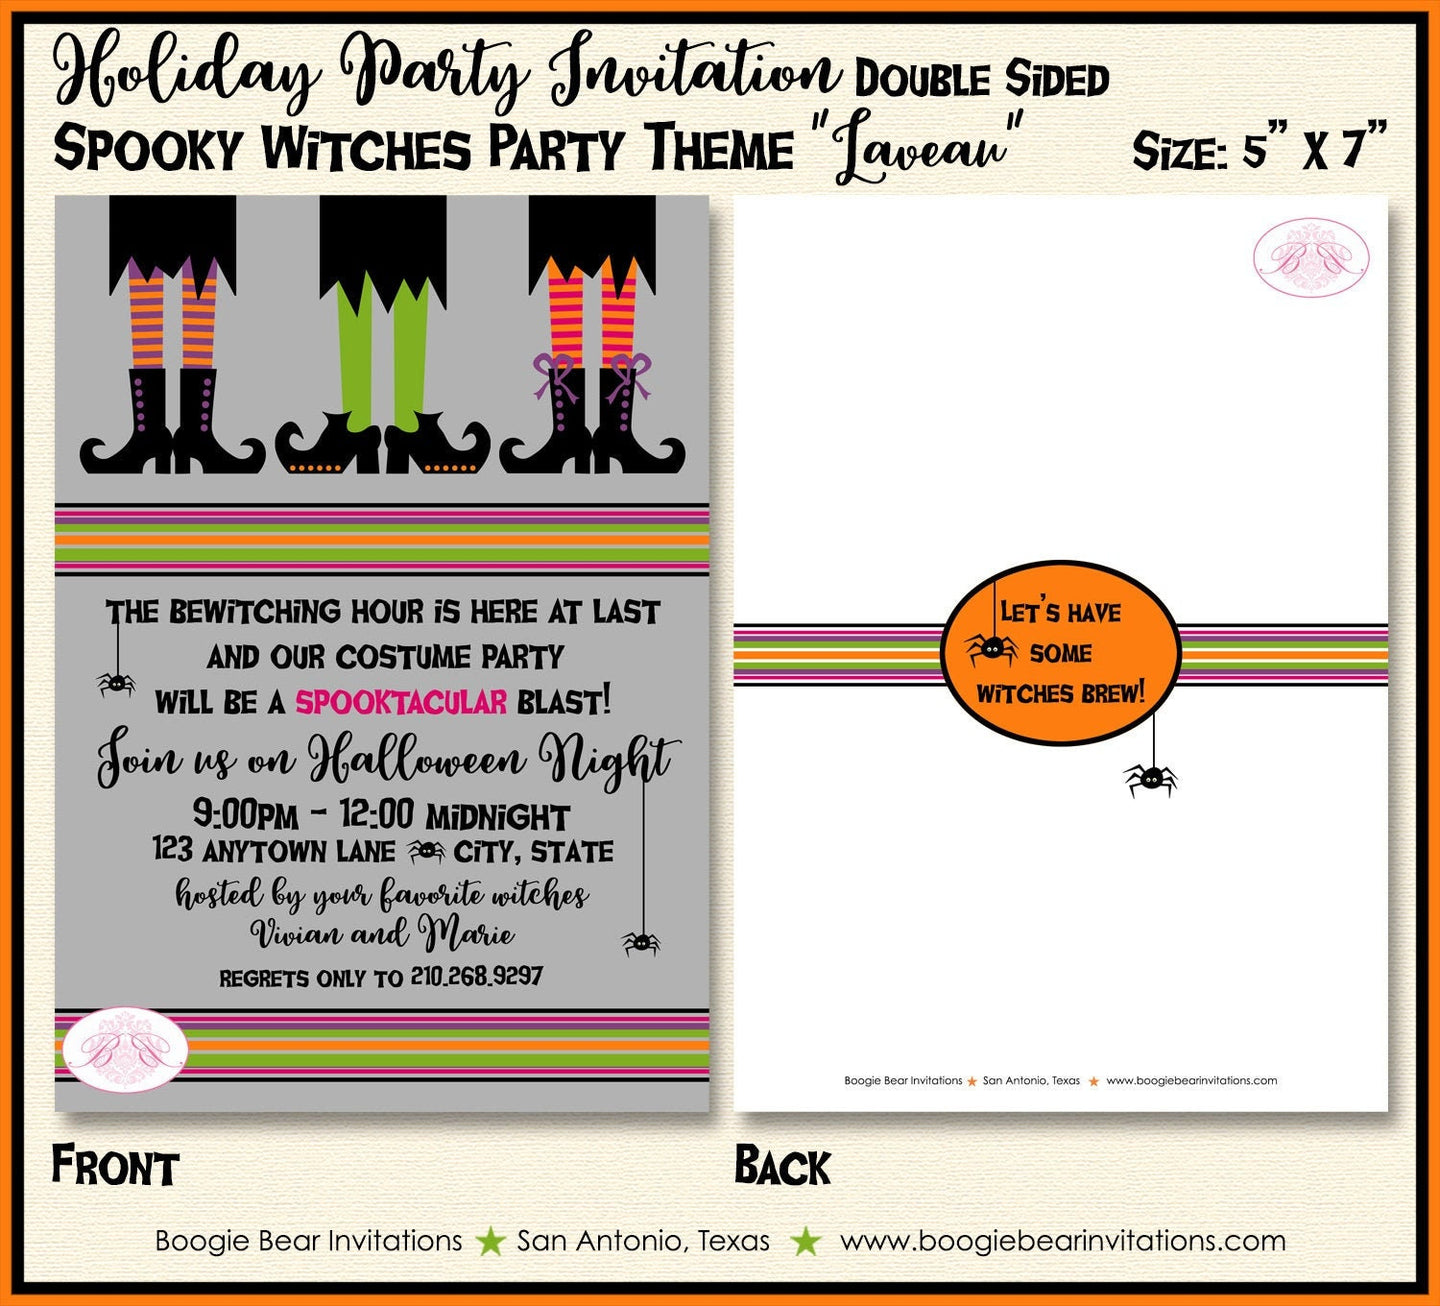 Halloween Witches Party Invitation Witch Costume Spooky Spider Orange Black Boogie Bear Invitations Laveau Theme Paperless Printable Printed